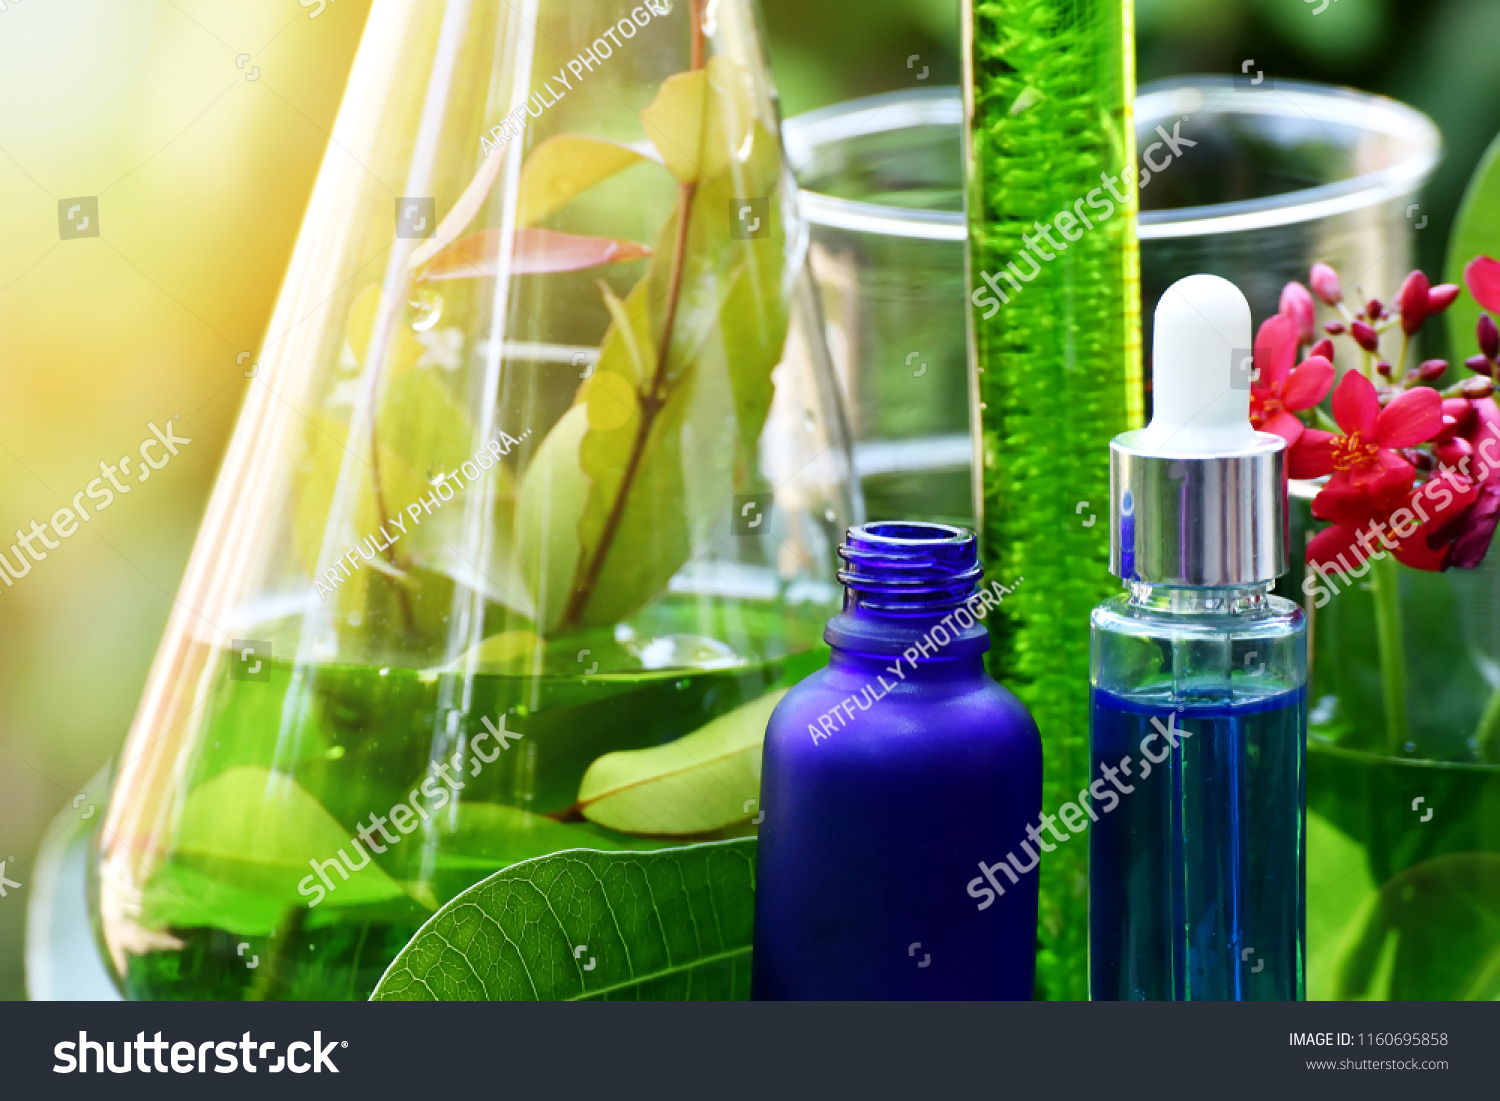 Drug research, Natural organic botany and scientific glassware, Alternative green herb medicine, Natural skin care beauty products, Research and development concept. #1160695858